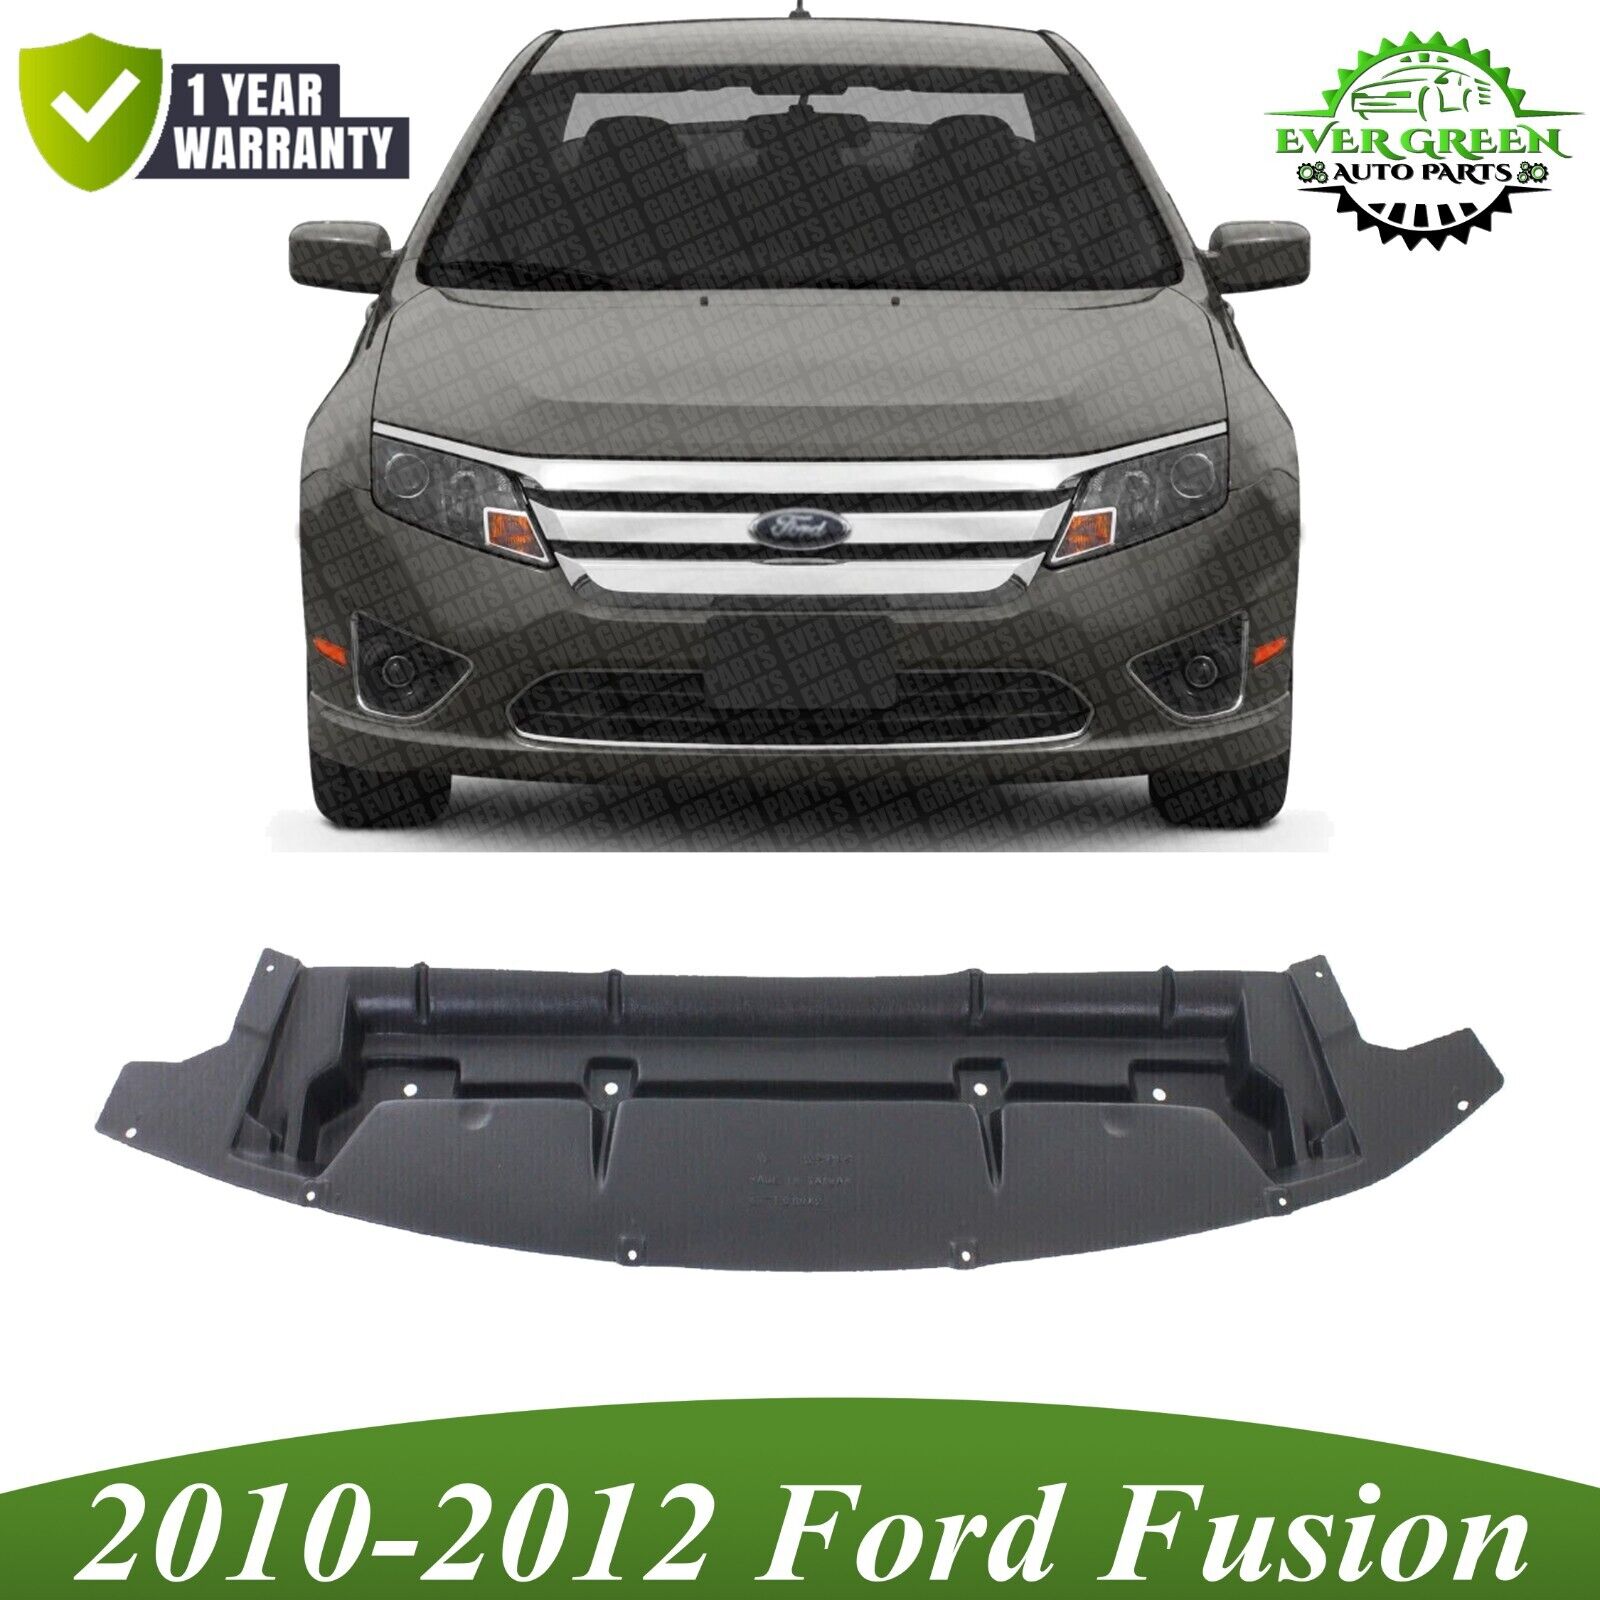 Front Bumper Lower Valance Engine Cover Textured Plastic For 2010-12 Ford Fusion